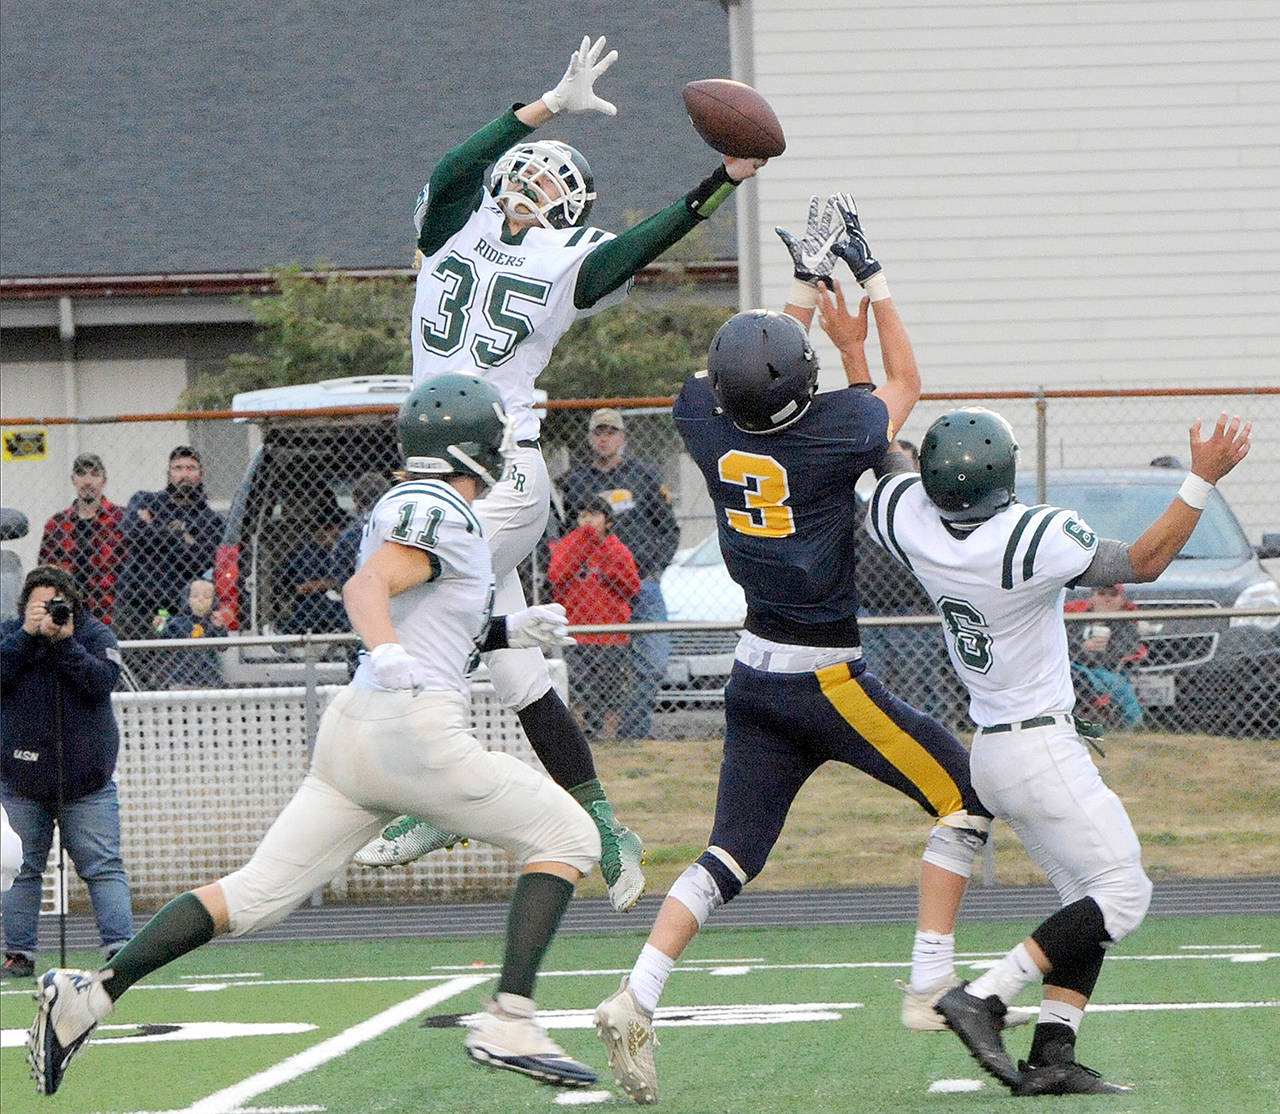 Lonnie Archibald/for Peninsula Daily News Port Angeles’s Derek Bowechop (35) leaps high to deflect a Forks pass in last season’s season opener. The two area teams will meet at Civic Field on Friday, Sept. 6.